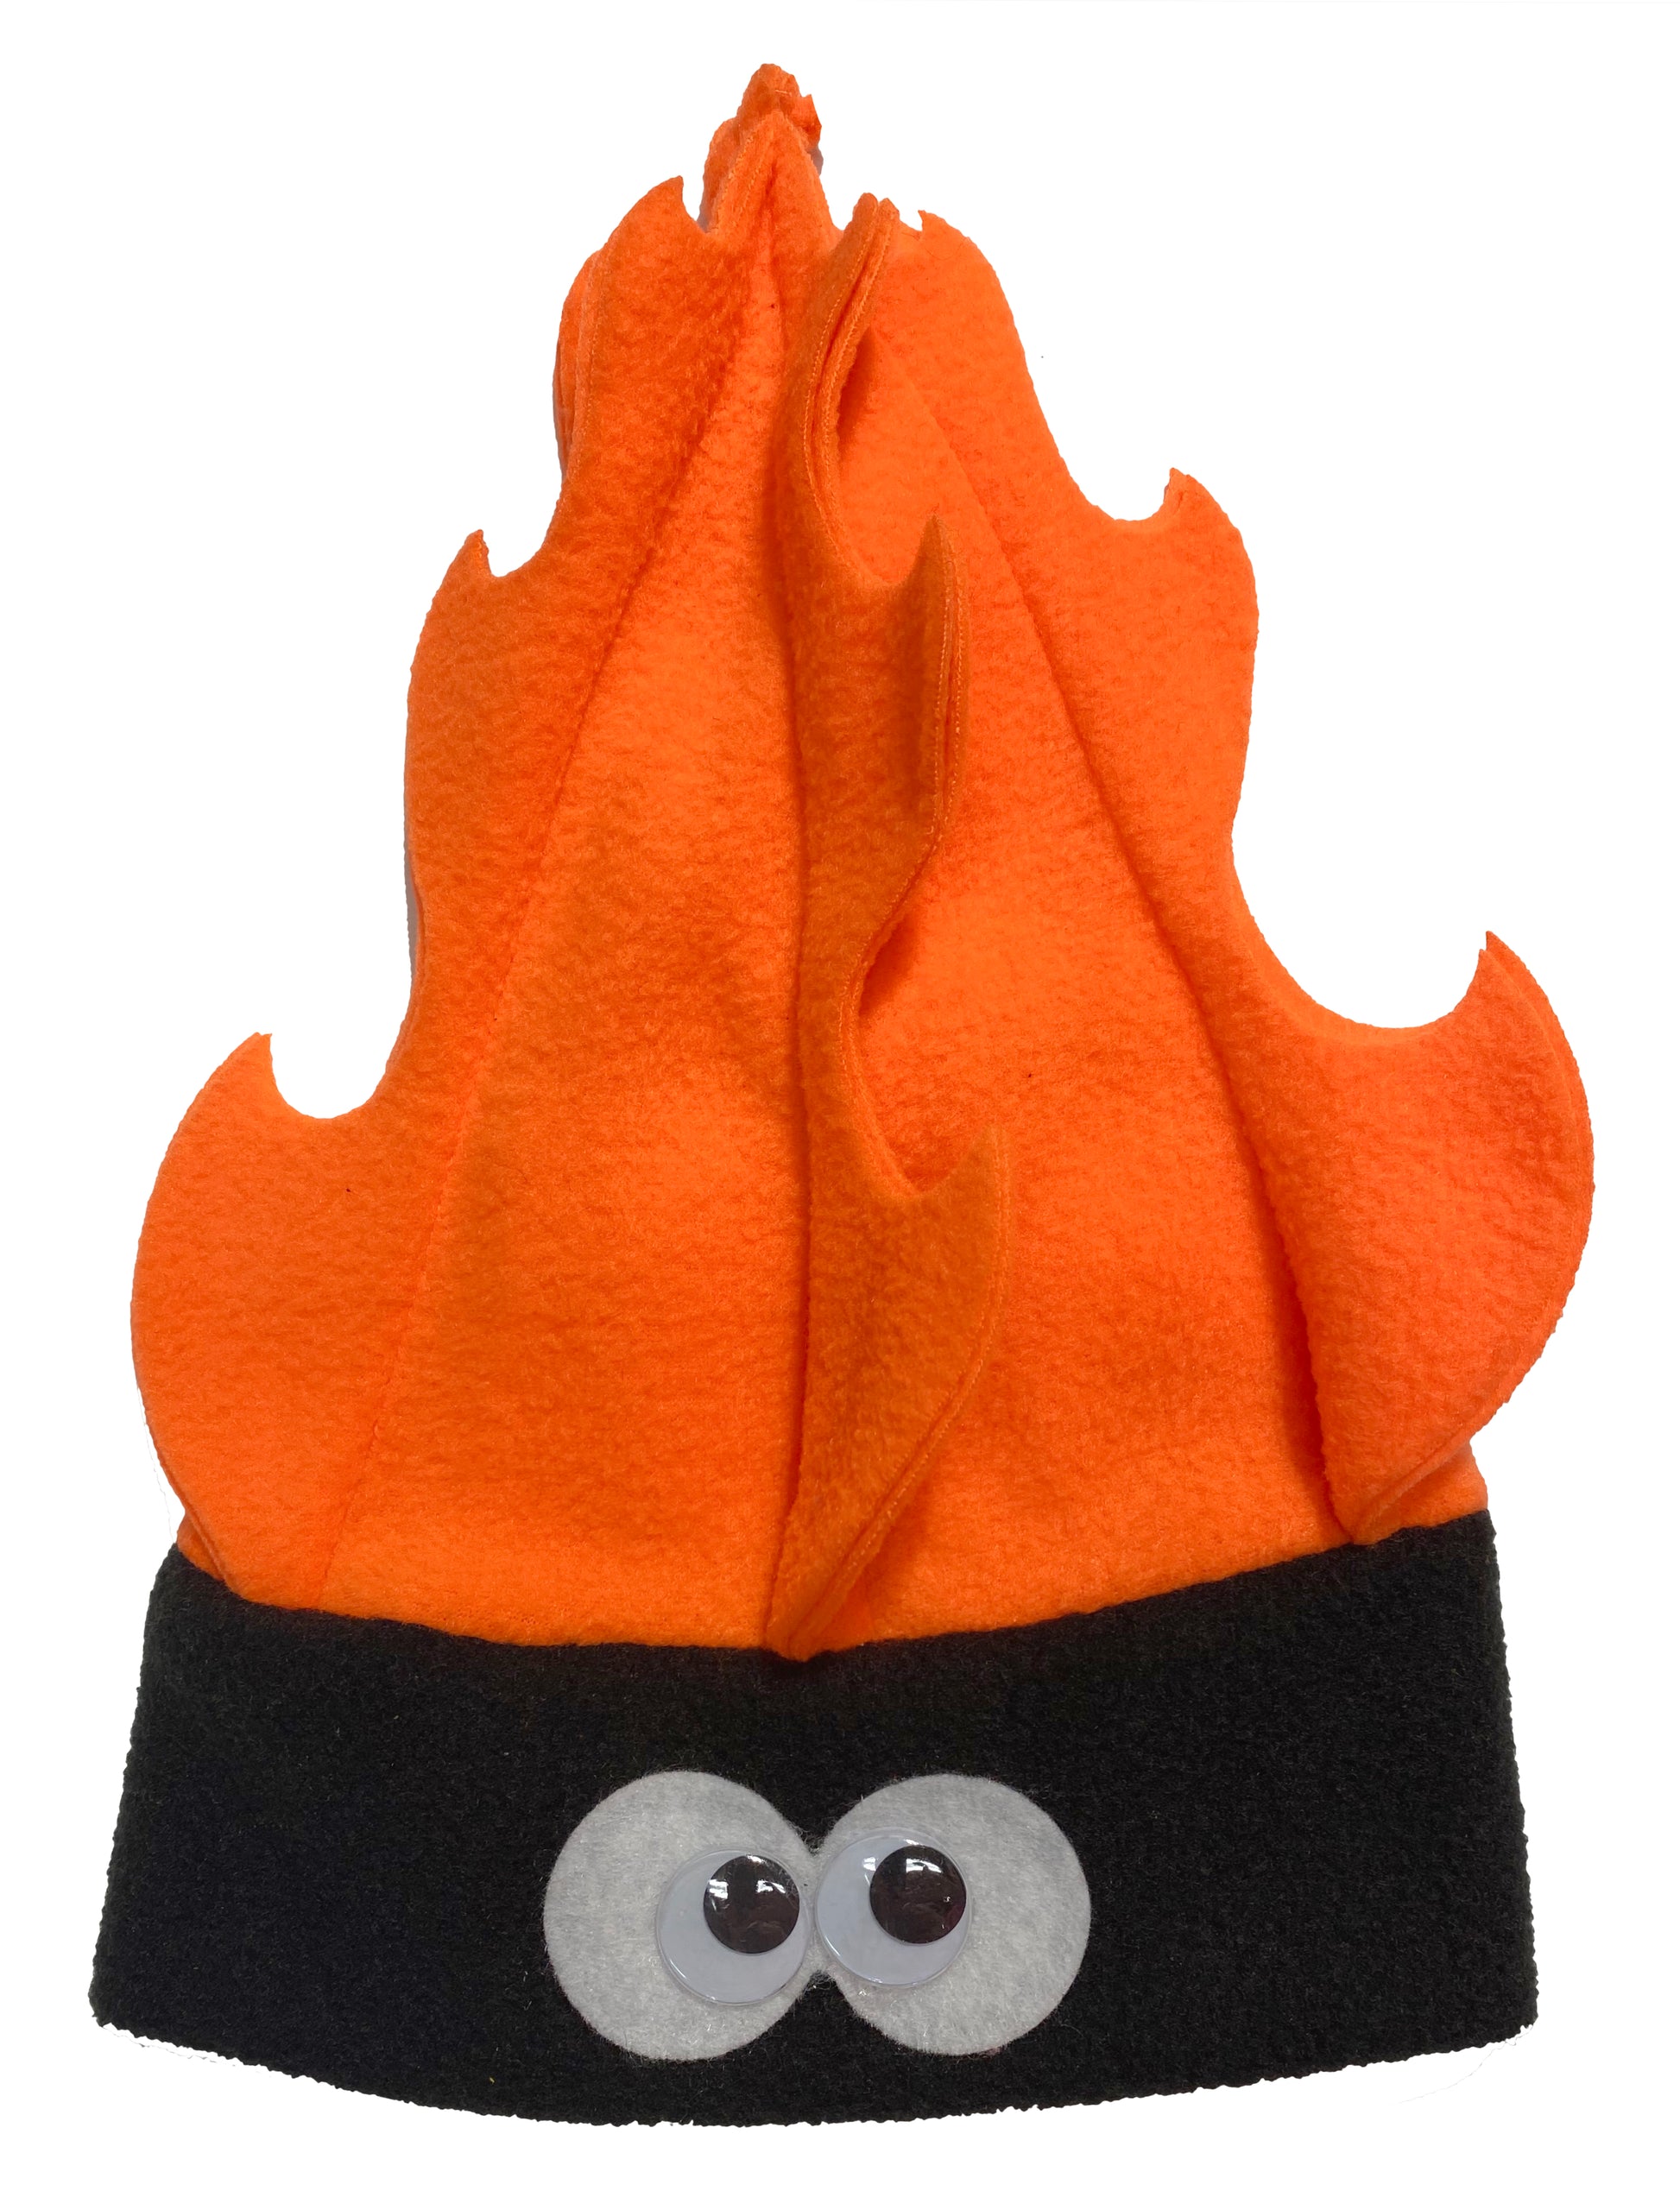 Fire Hats - Small - Fits heads up to 20" - Brainchild Designs